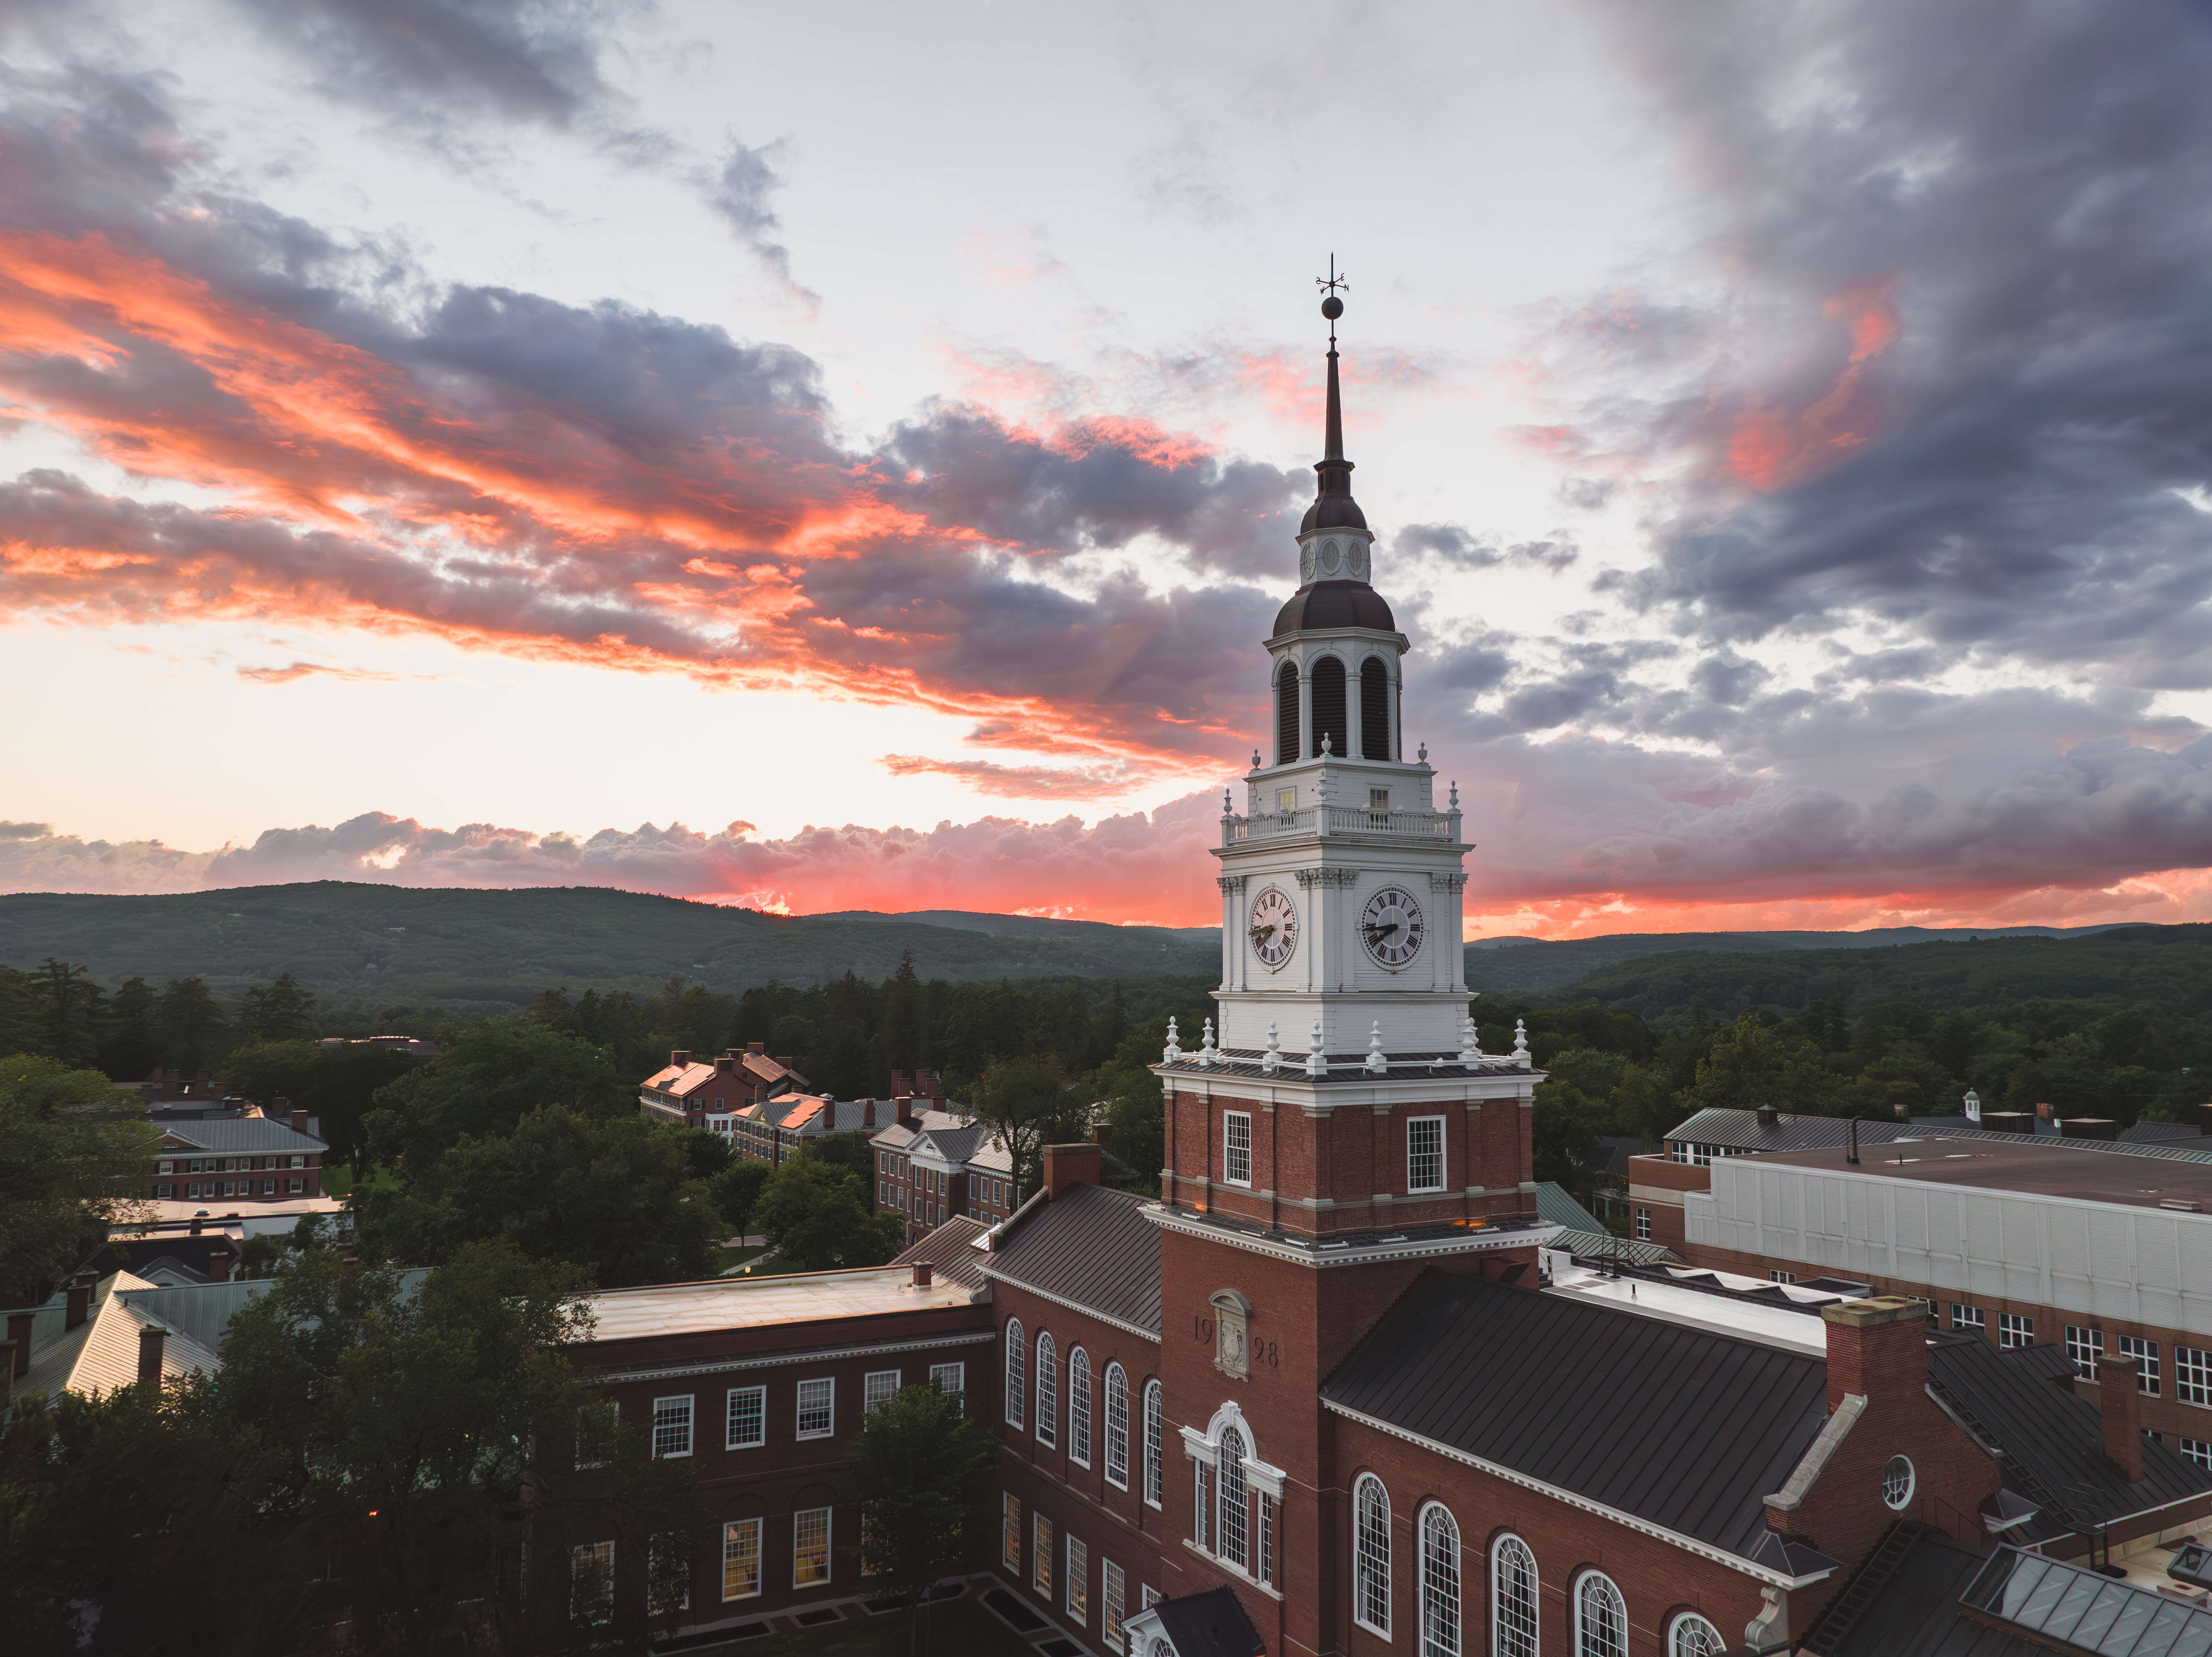 A drone shot at dusk featuring a side view of Baker Tower